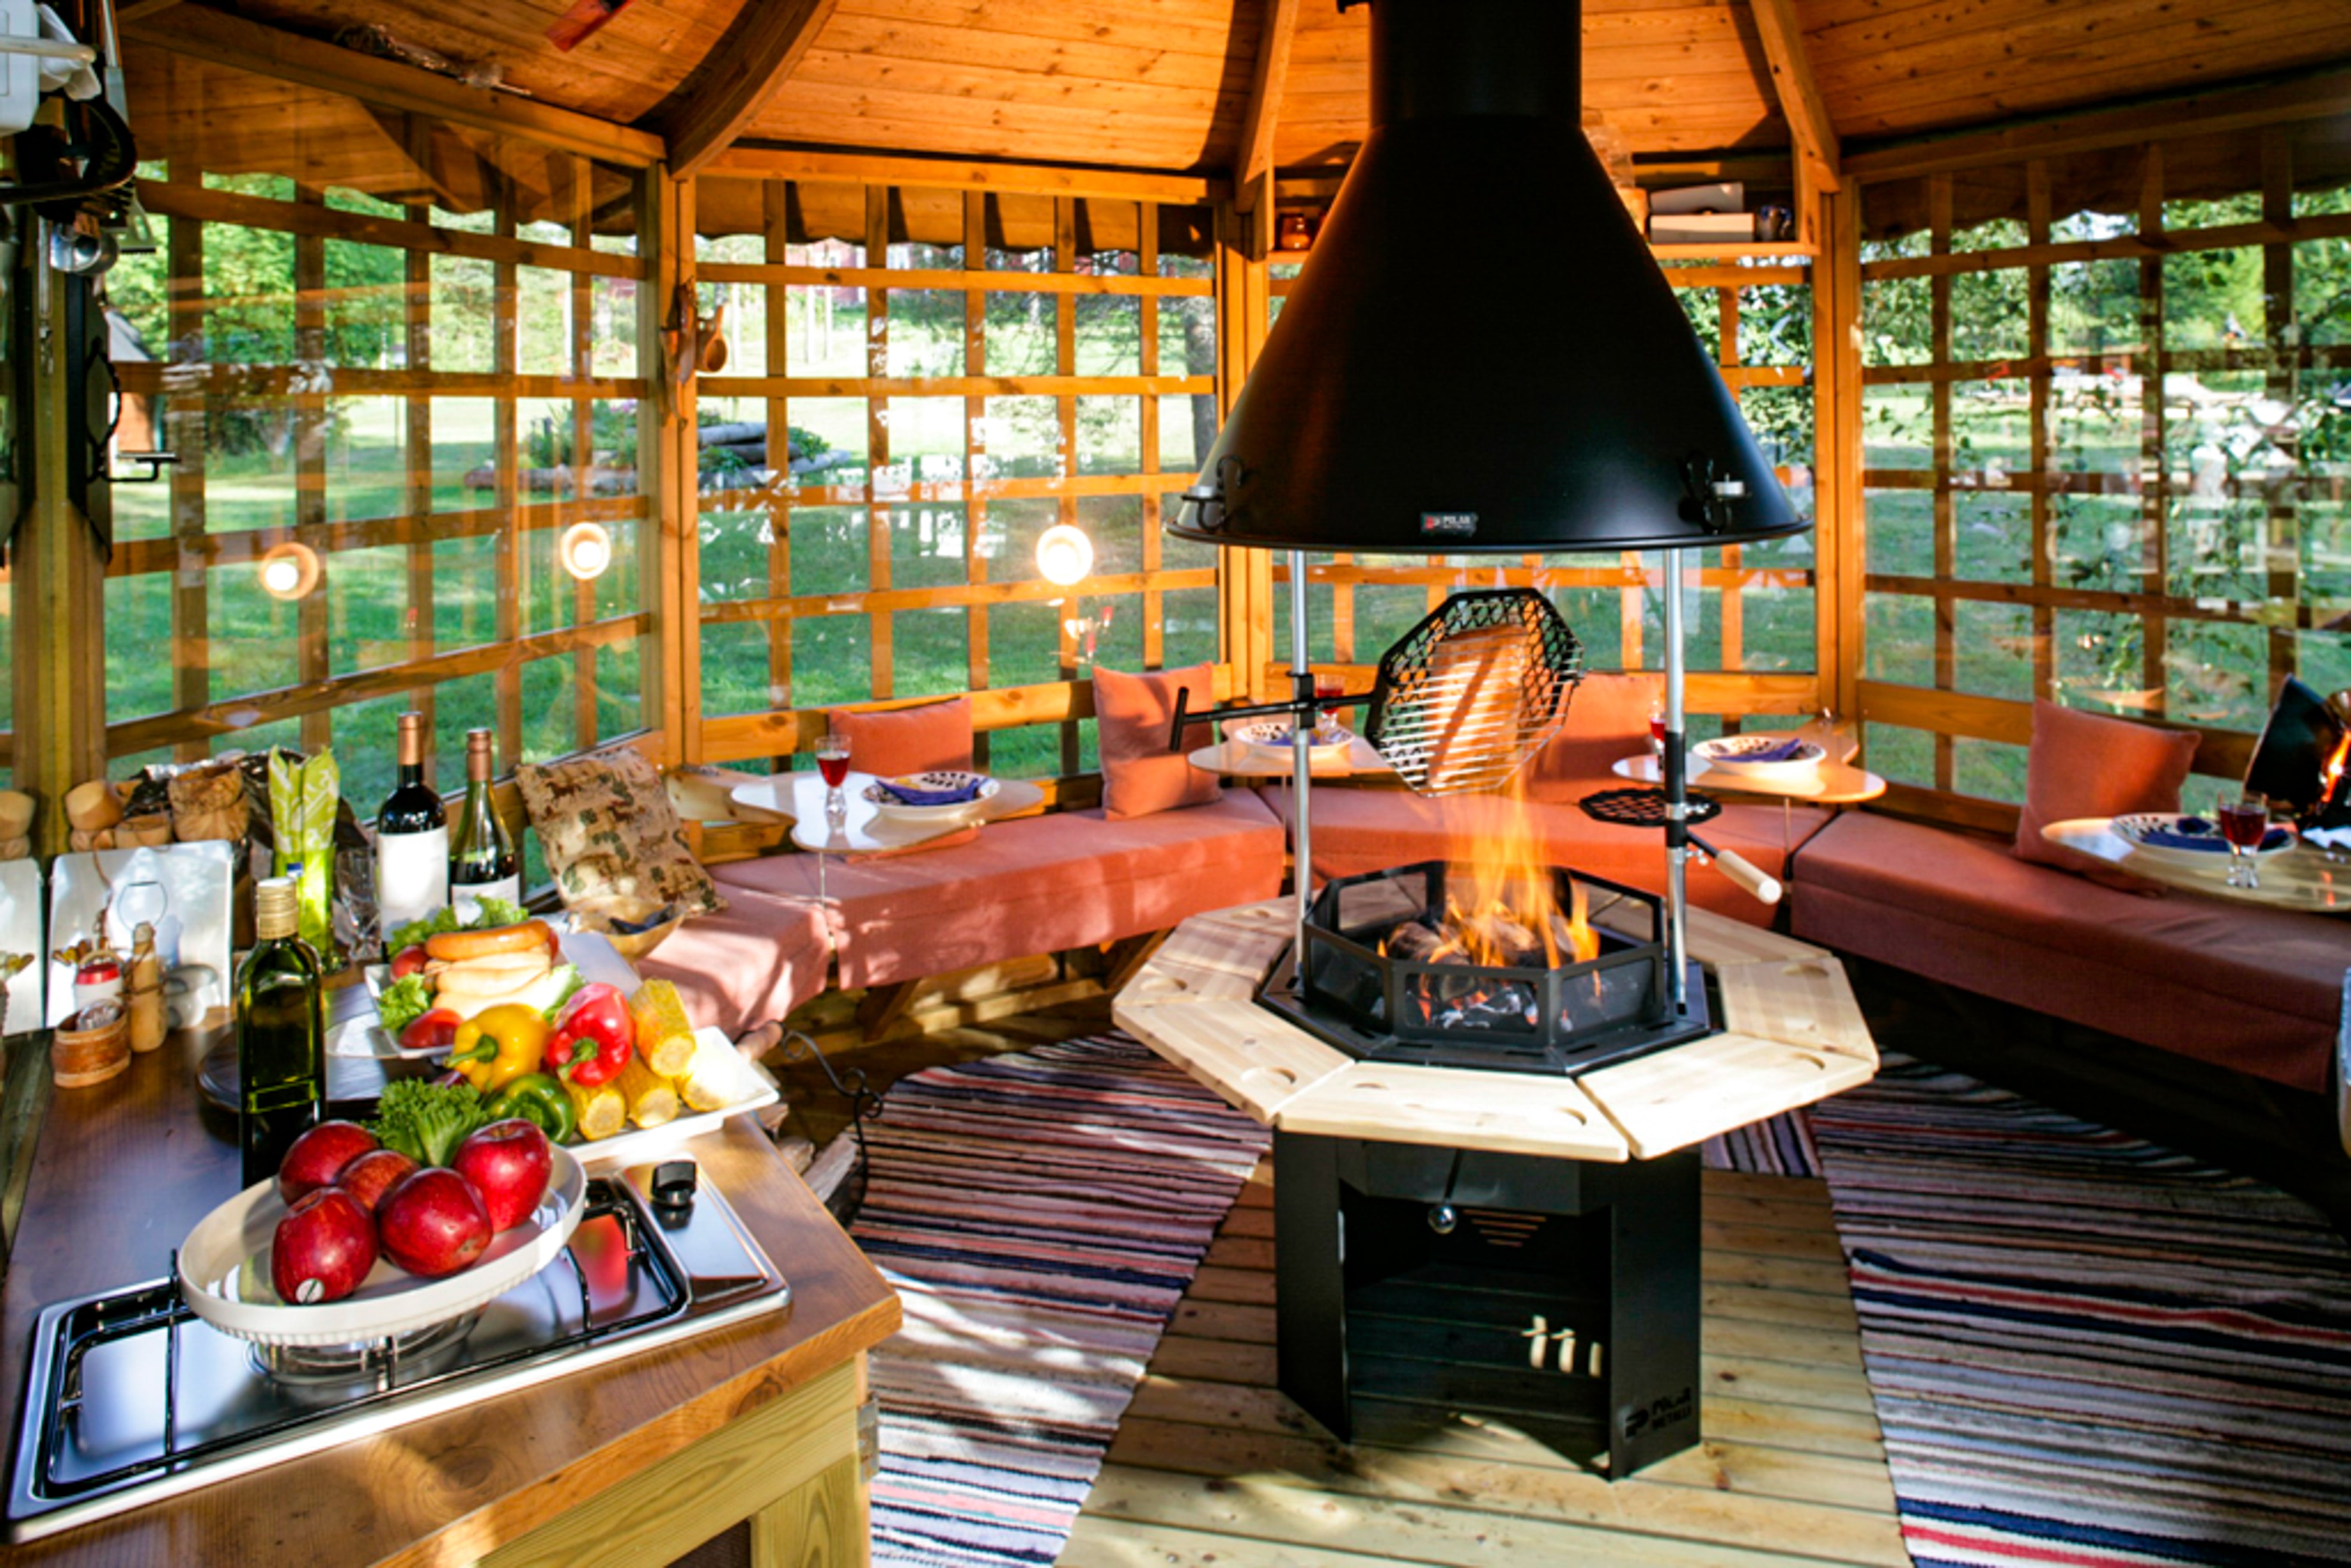   A Gazebo style structure encloses a series of pillowed seats and a Kota Grill. Food sits around the burning fire.     